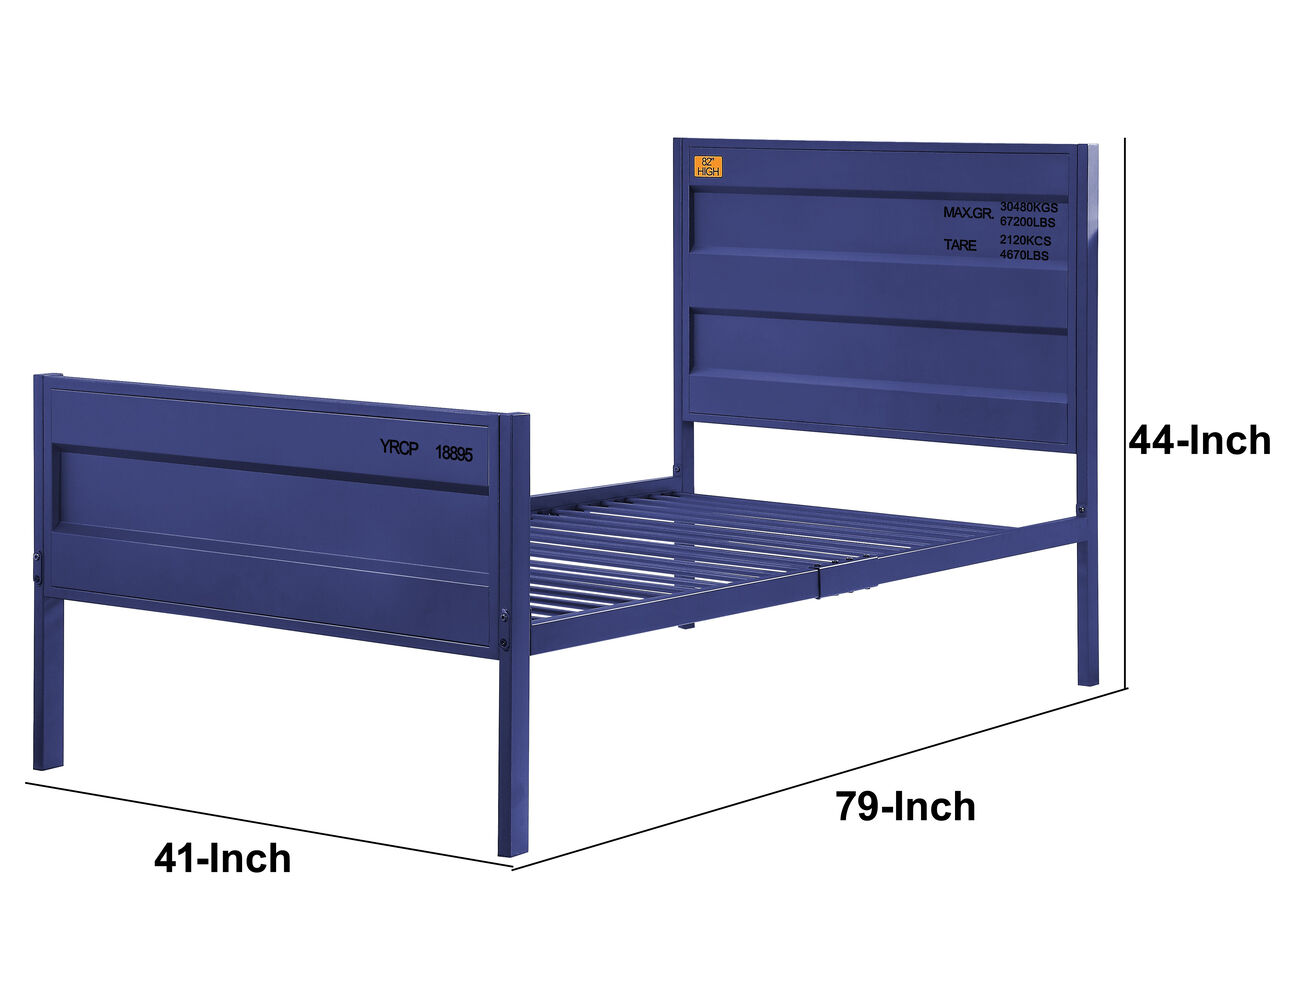 Industrial Style Metal Twin Size Bed with Straight Leg Support, Blue